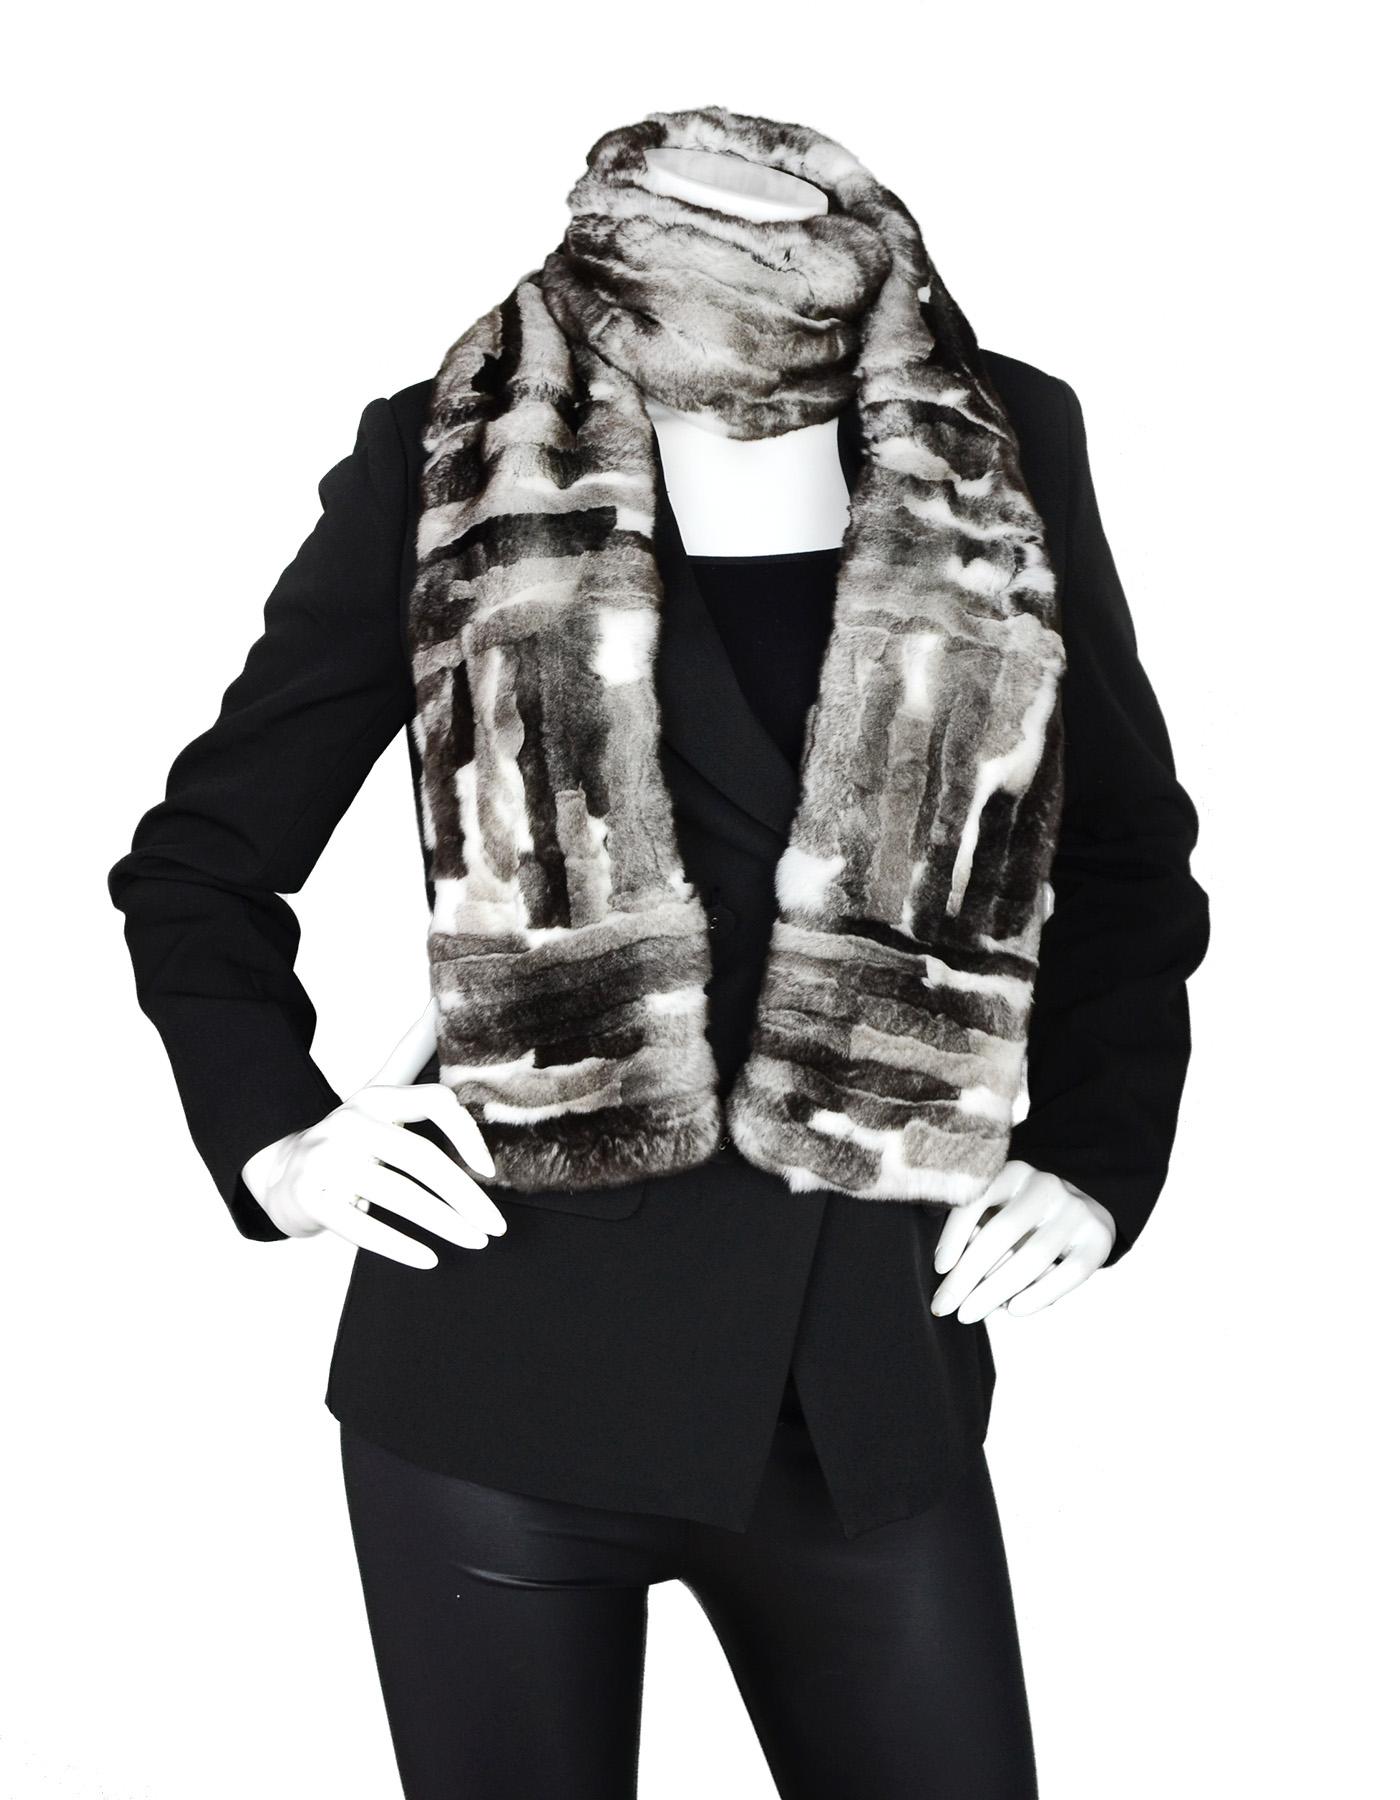 Chanel Grey Cashmere CC Print Rabbit Fur Stole Scarf

Made In: Italy
Color: Grey
Materials: 100% cashmere and rabbit fur
Overall Condition: Excellent pre-owned condition 
Estimated Retail: $1,875 + tax

Measurements: 
5.25